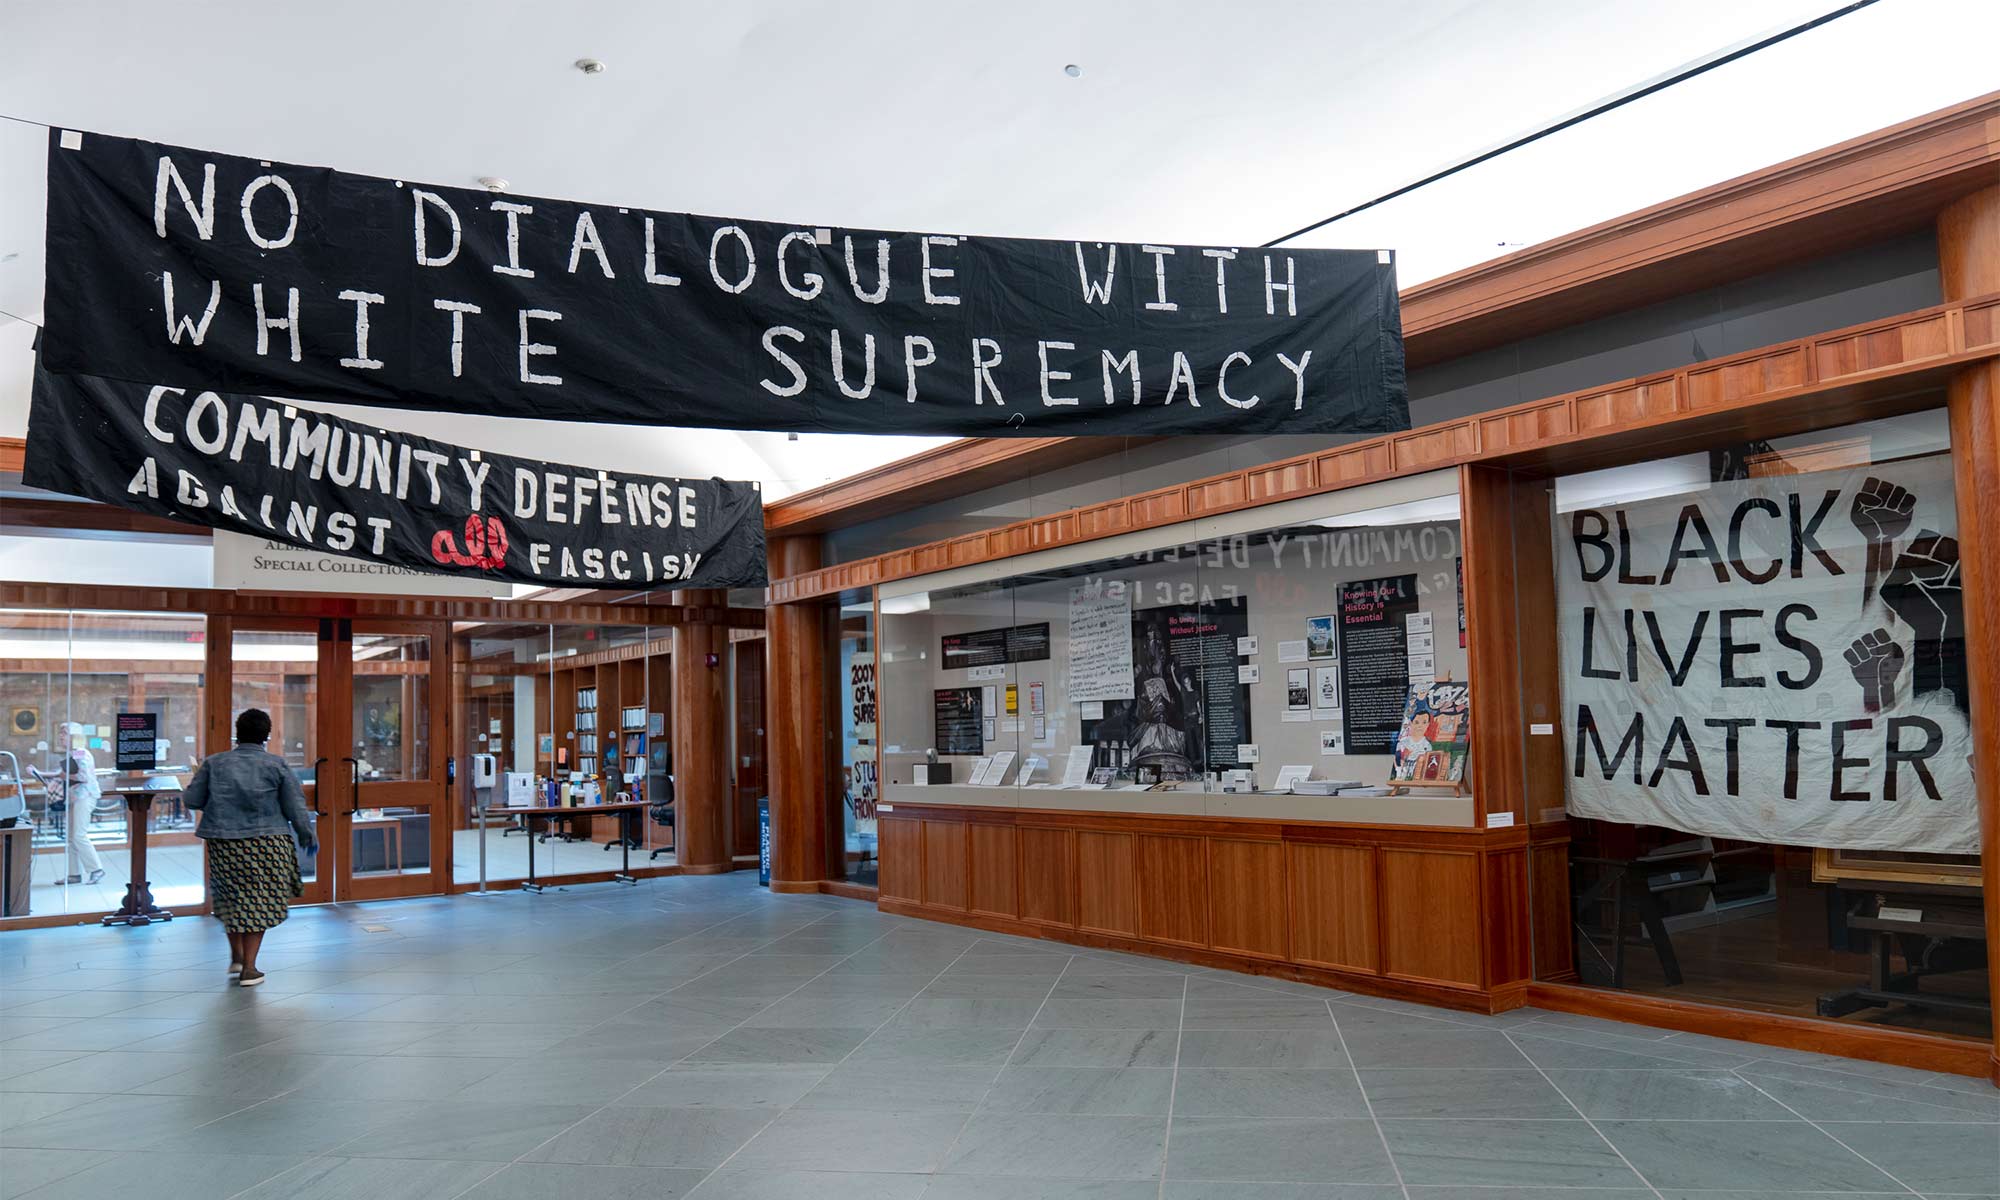 Interior photo of a display with banners that read "No dialogue with white supremacy" and "Community defense against fascism" and "Black lives matter"